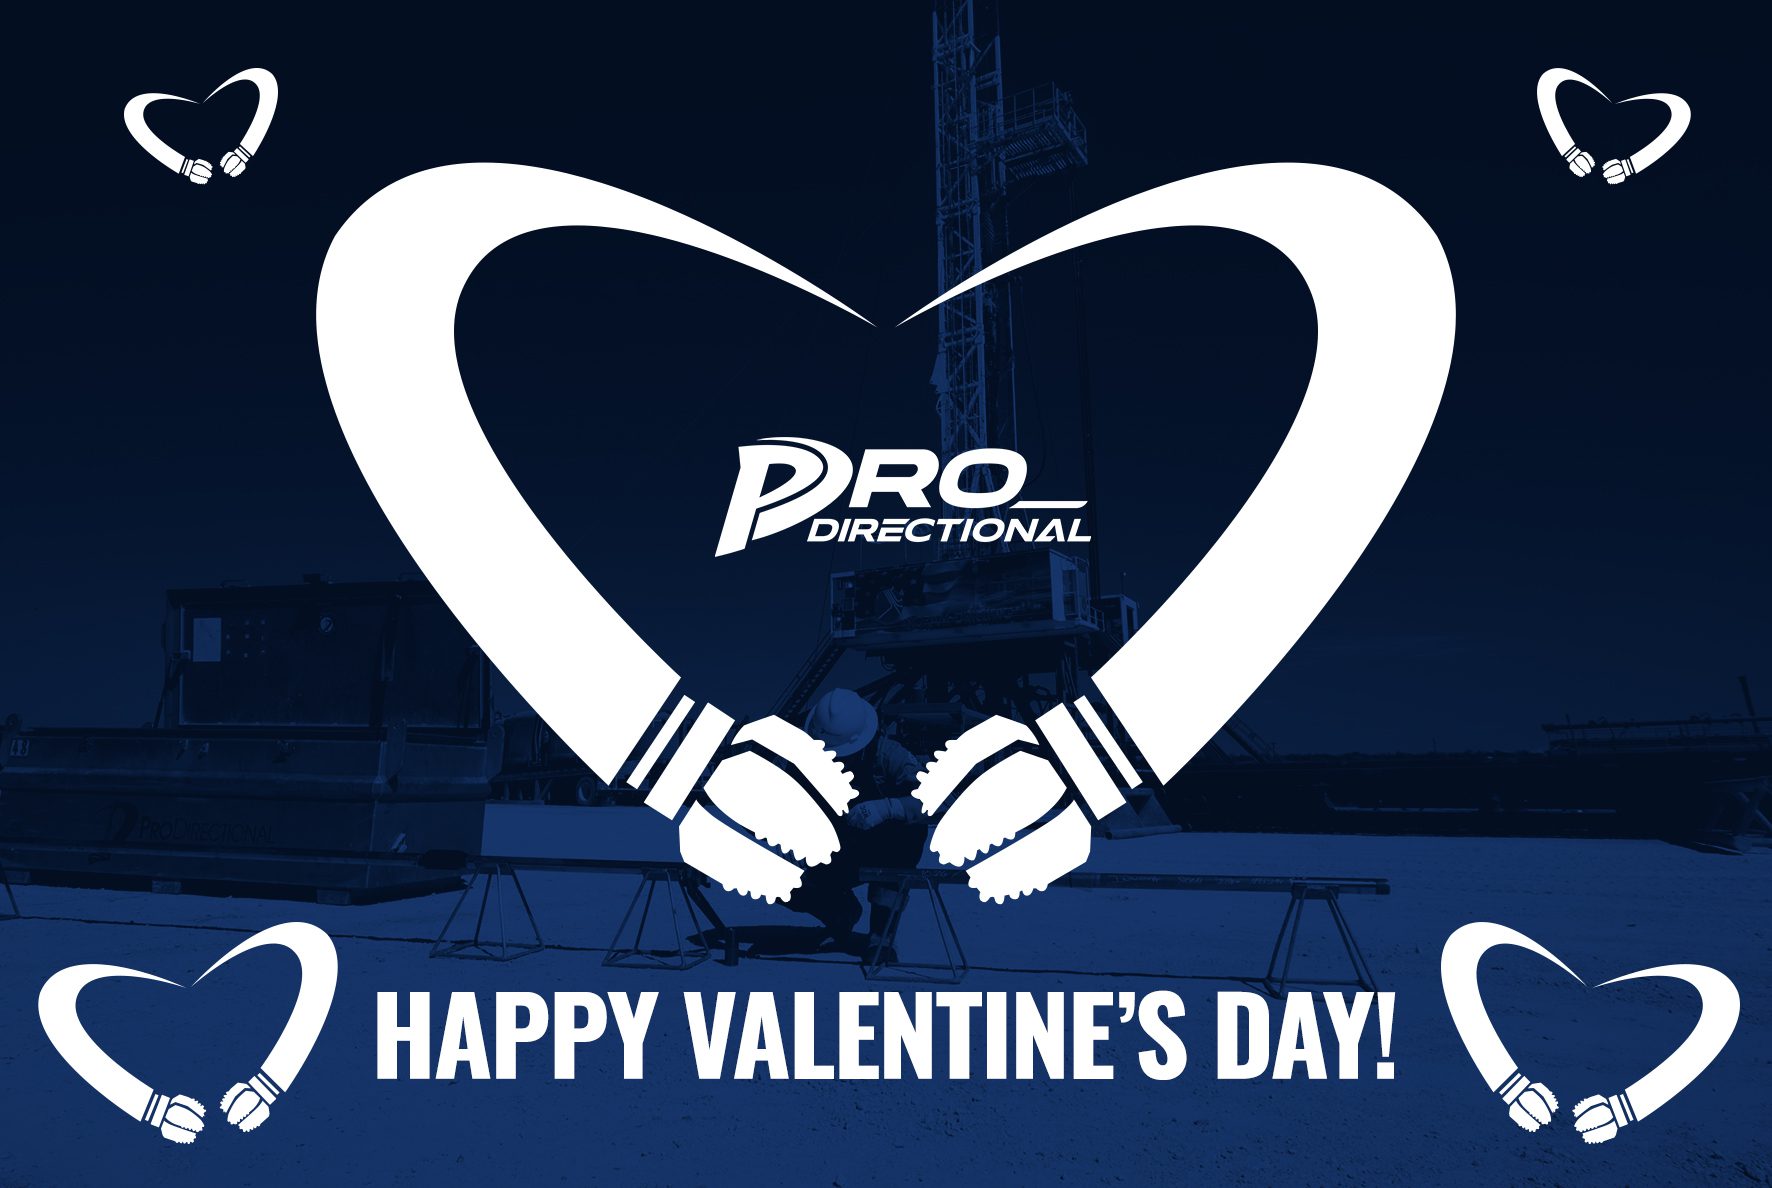 Featured image for “Happy Valentine’s Day from ProDirectional”